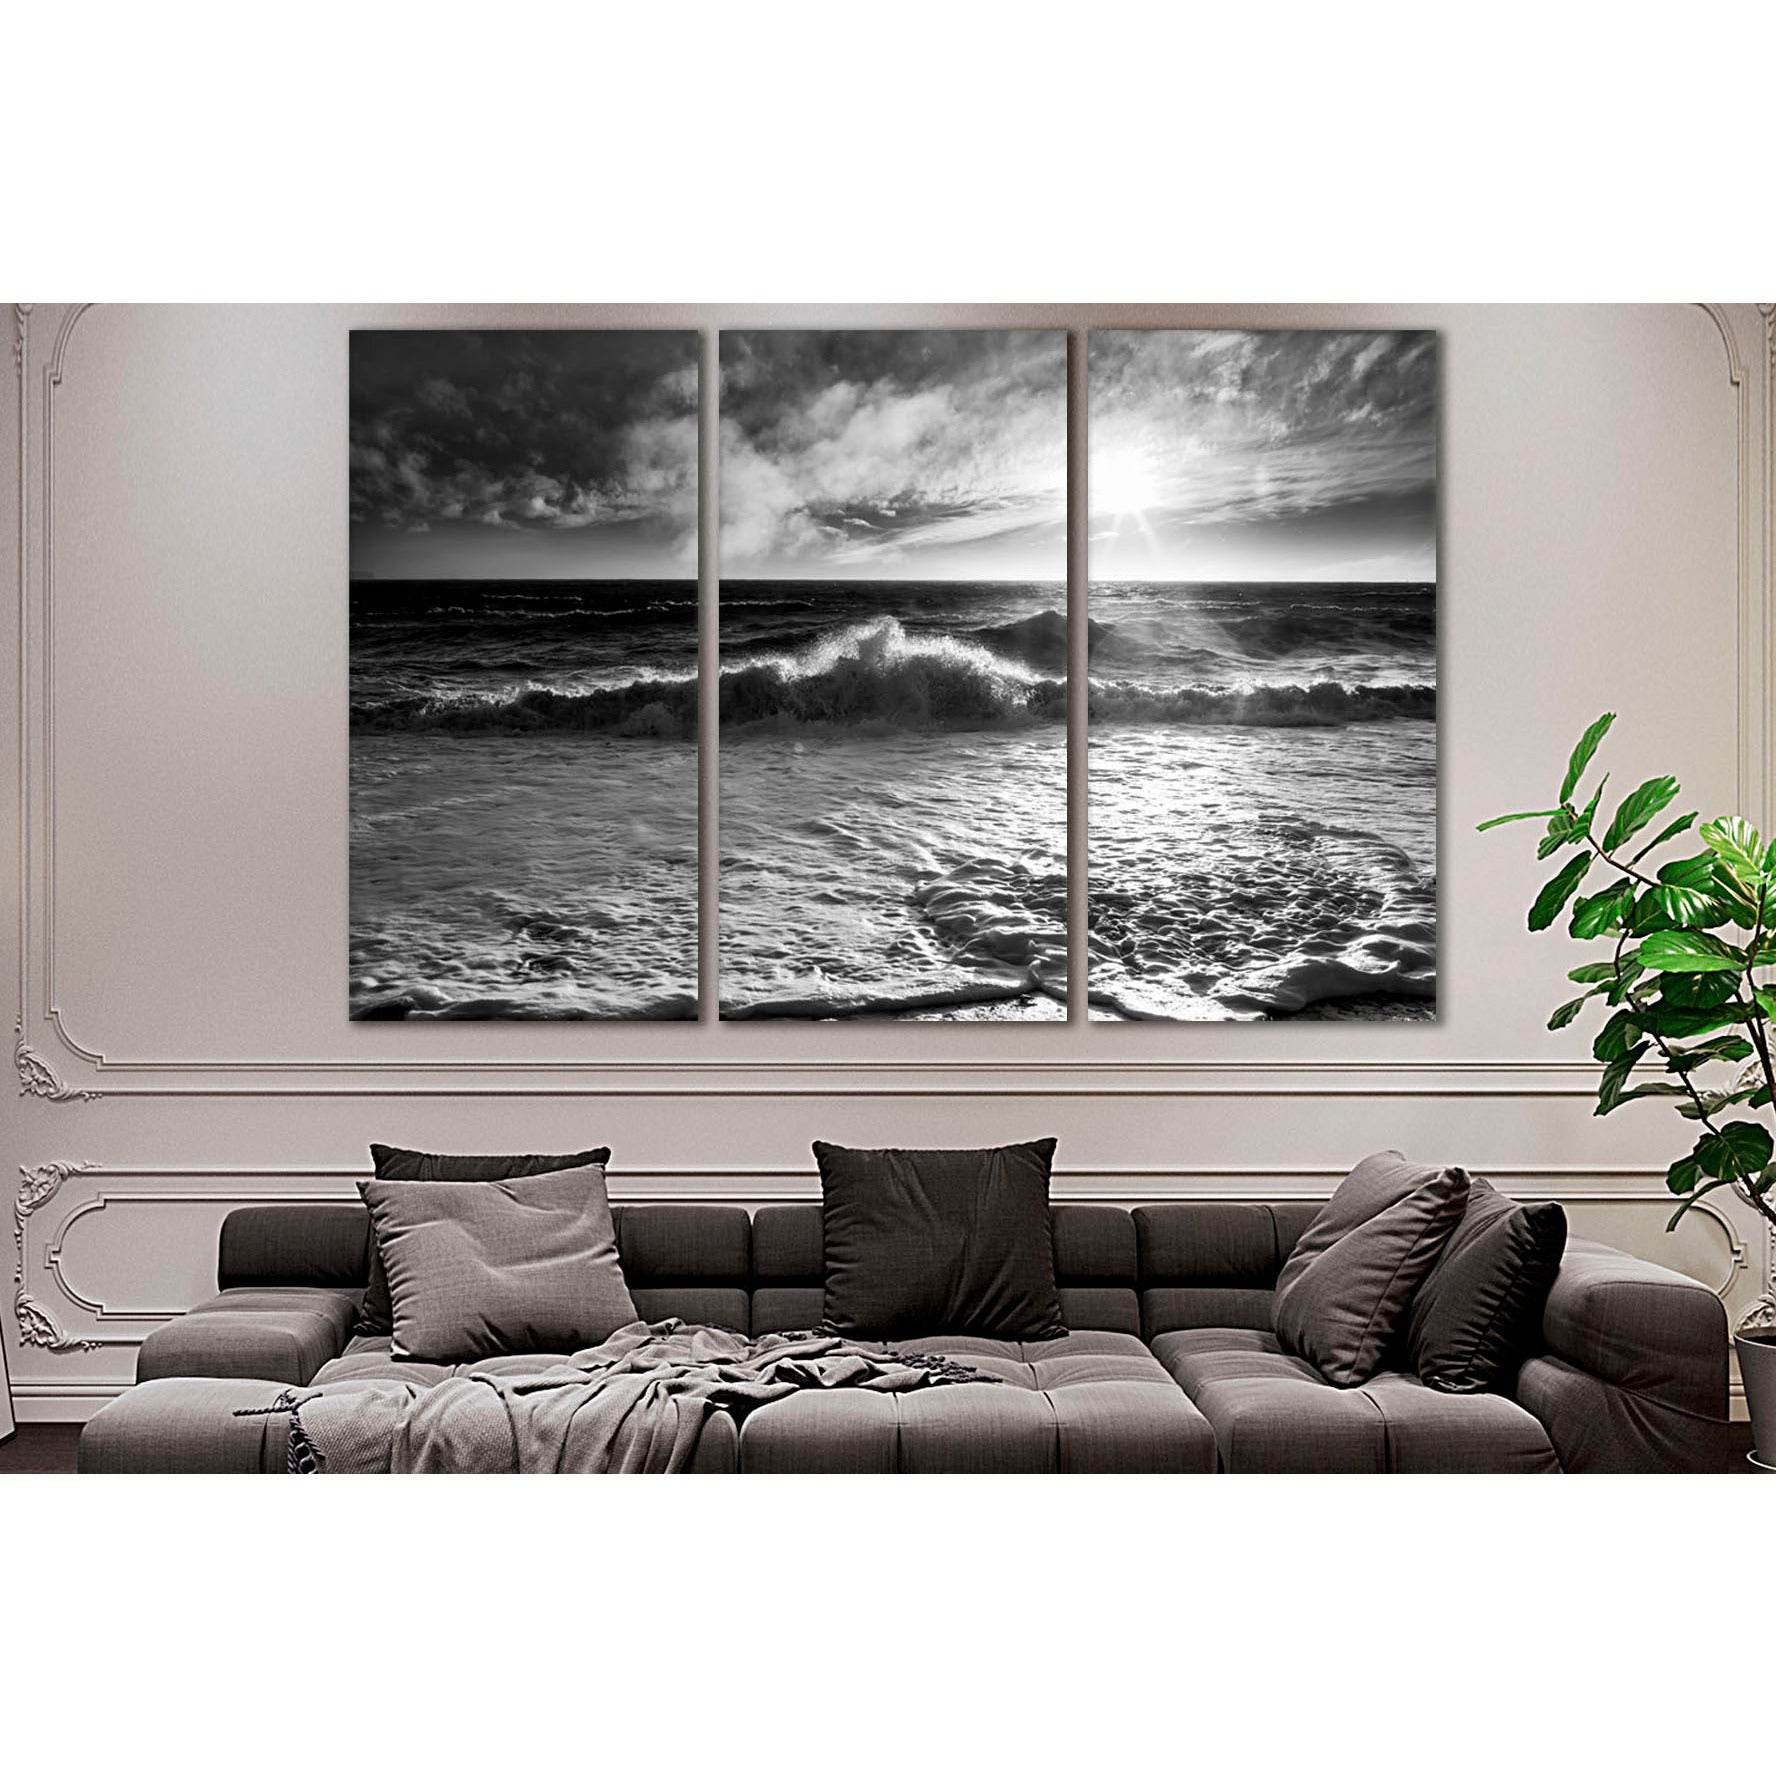 Ocean waves with a sunburst and lens flare on a windy day in black and white. №2925 Ready to Hang Canvas Print